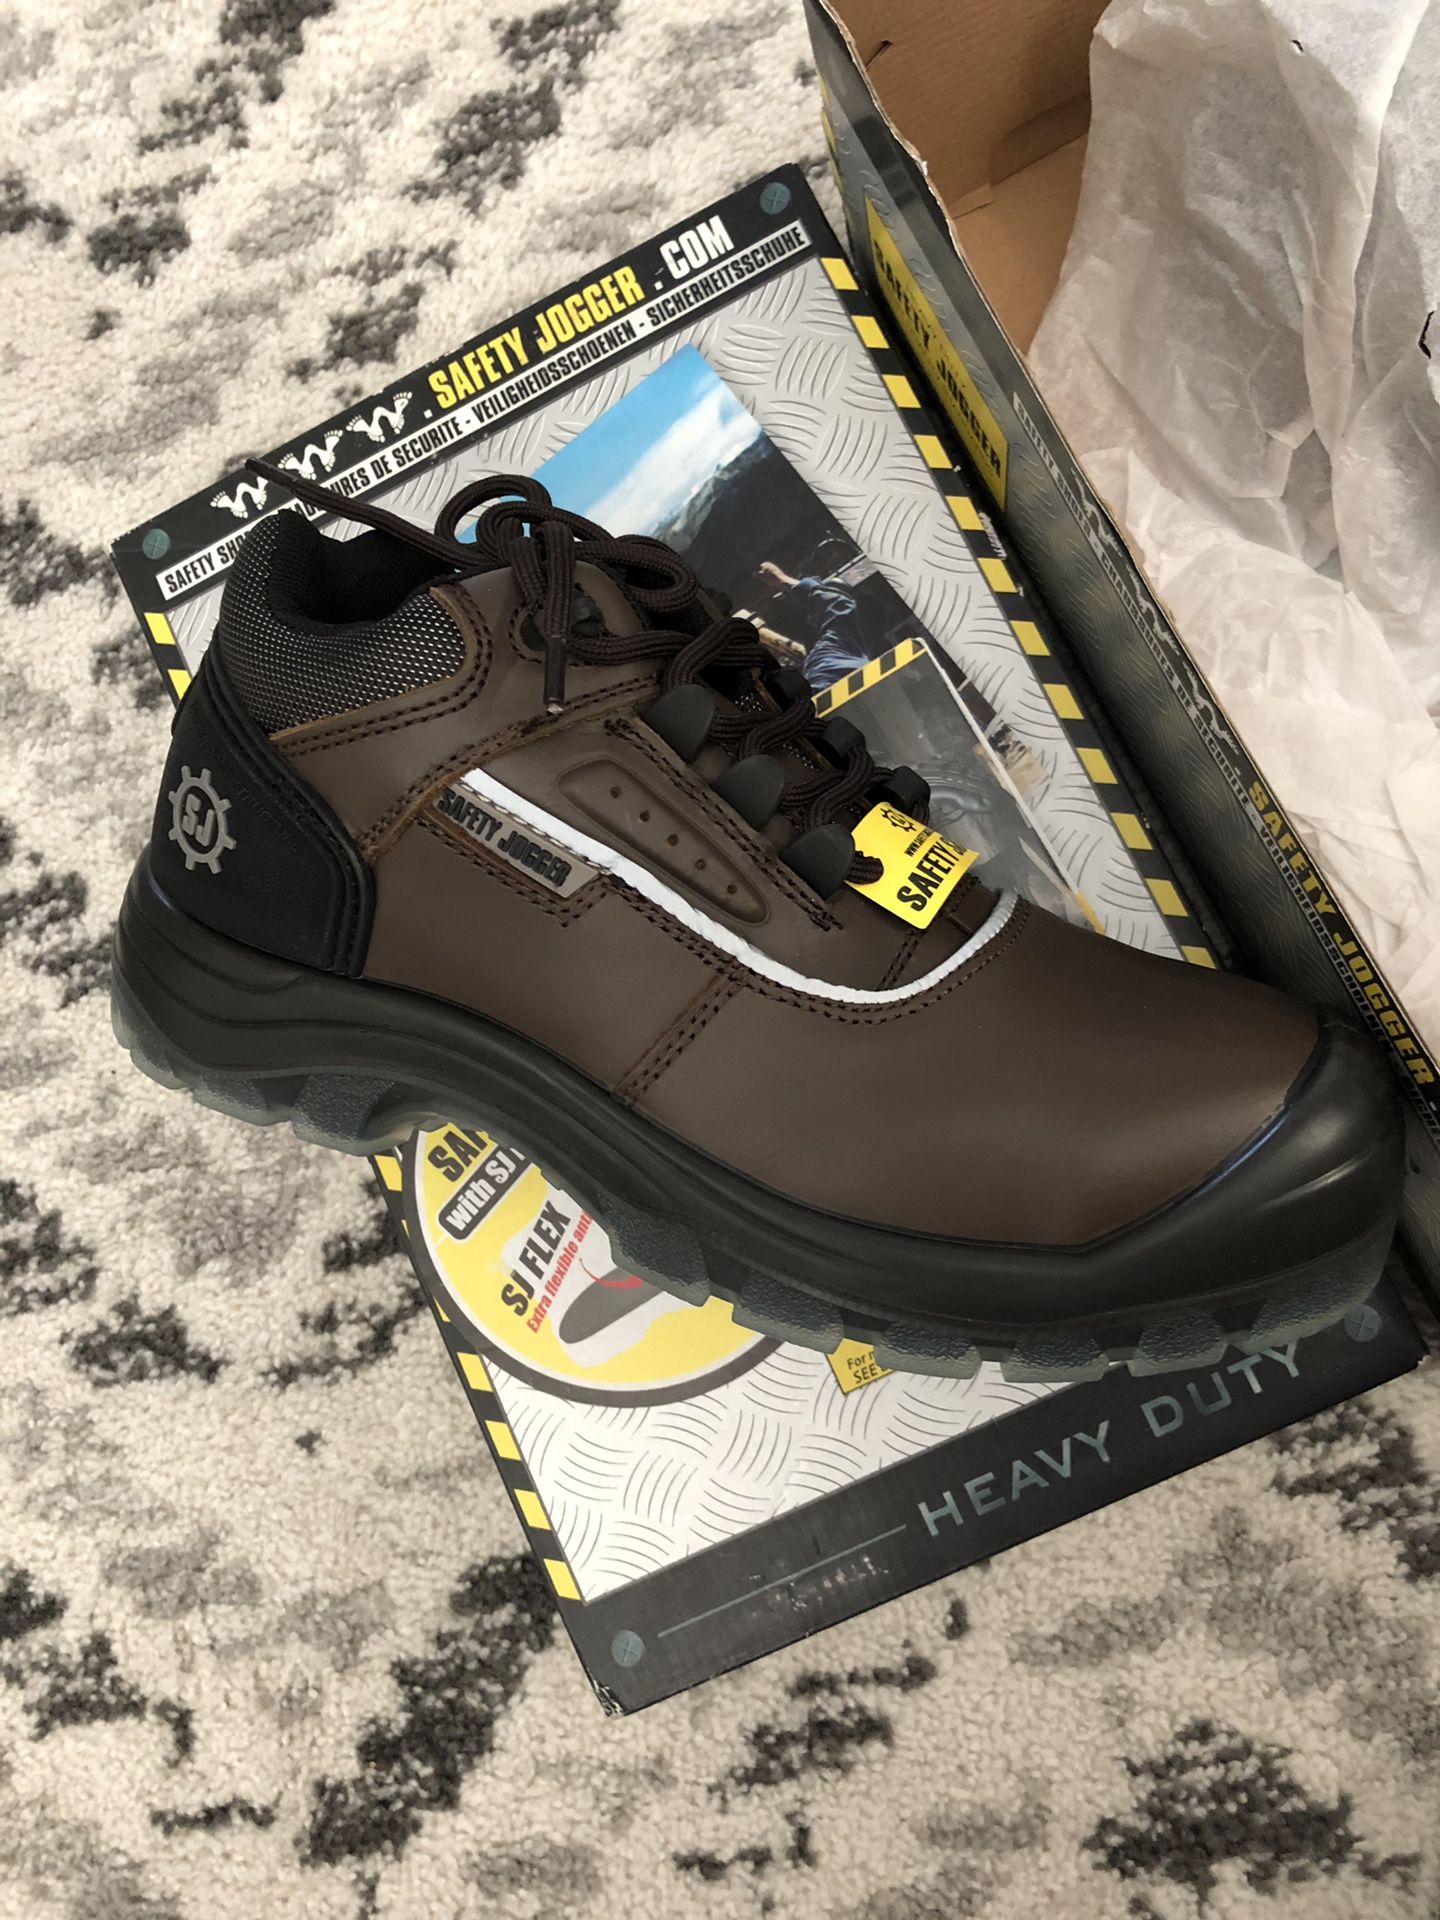 Men Work Boot Safety Jogger Pluto Leather Brown Black Size 7.5 100% Original Brand New. Condition is New in Box